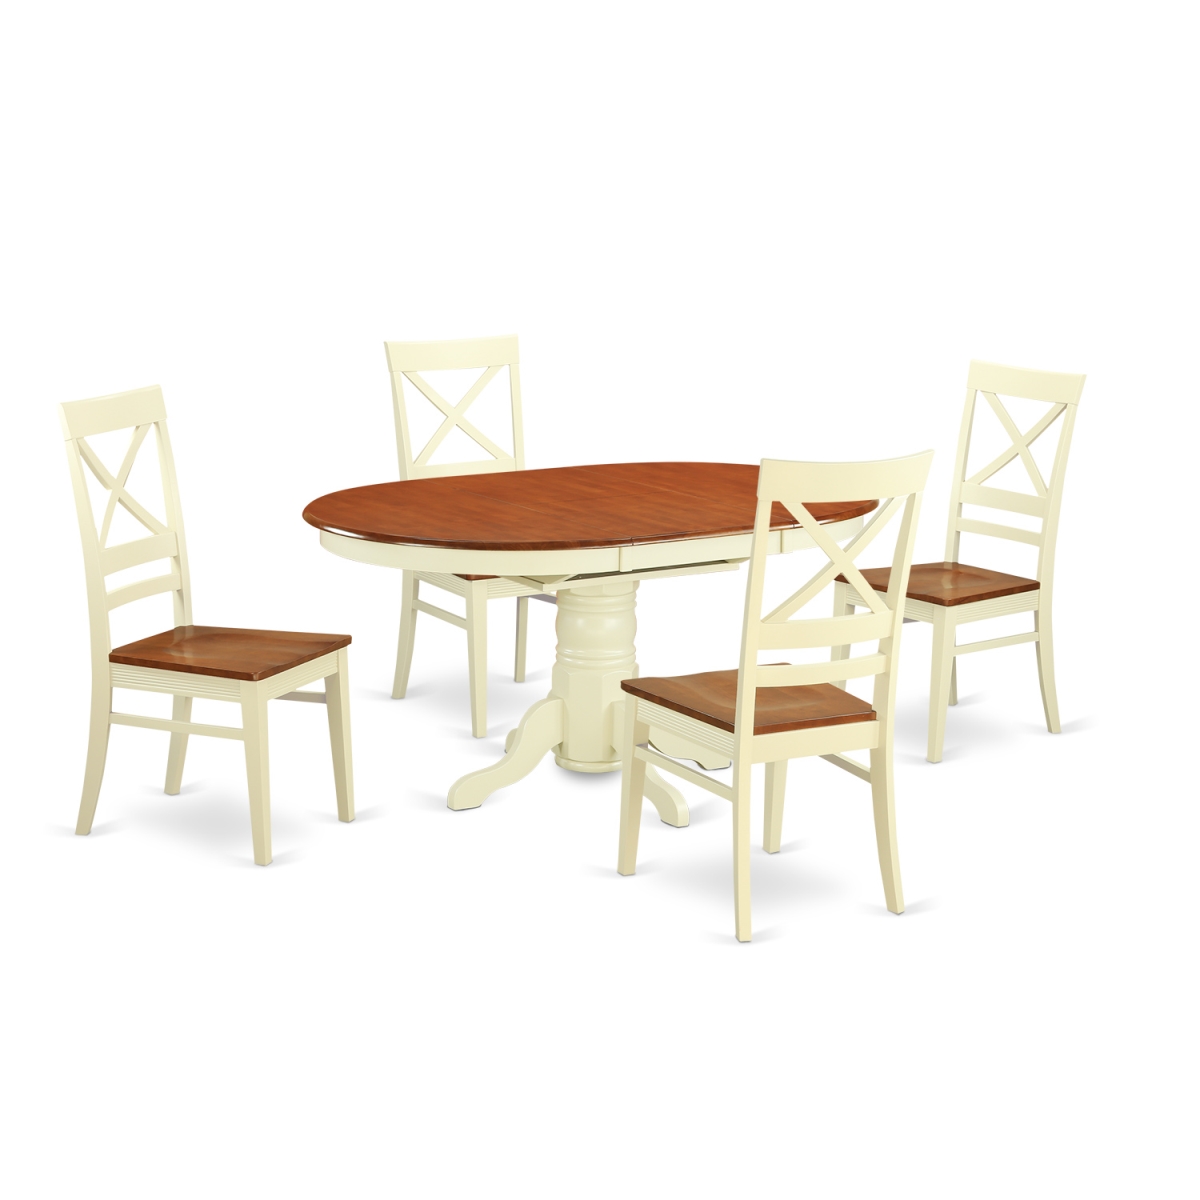 AVQU5-WHI-W Table & Chair Set - Dining Room Table & 4 Chairs, Buttermilk & Cherry - 5 Piece -  East West Furniture